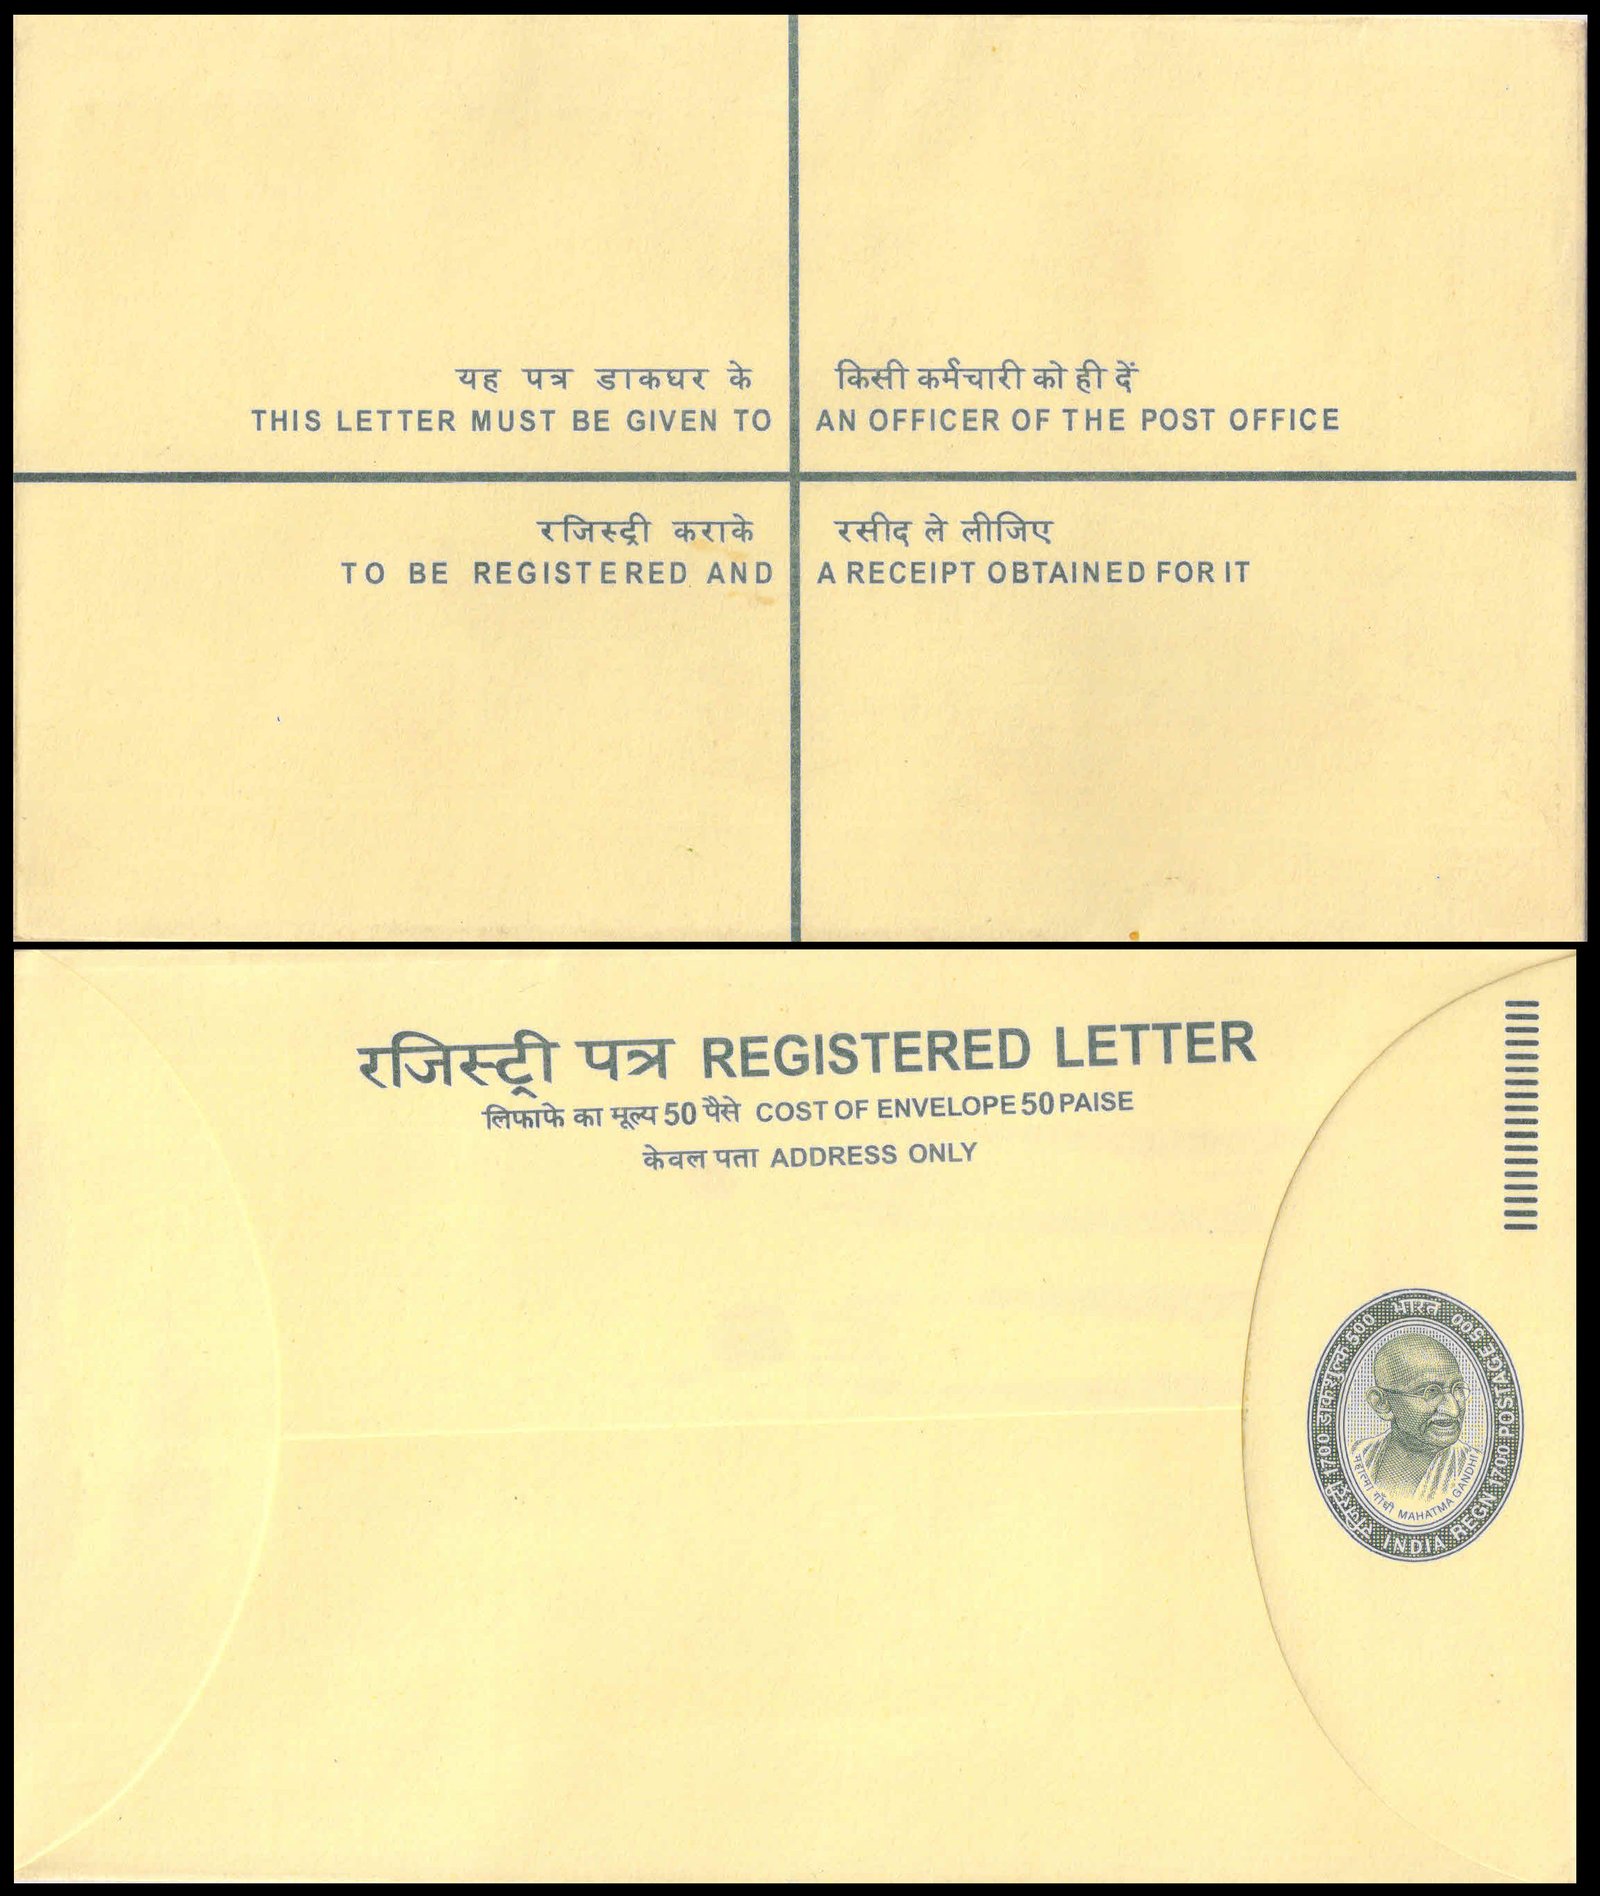 INDIA Registered Letter with Portrait of Mahatma Gandhi (Rs. 17+Rs. 25) Mint, Condition as per scan